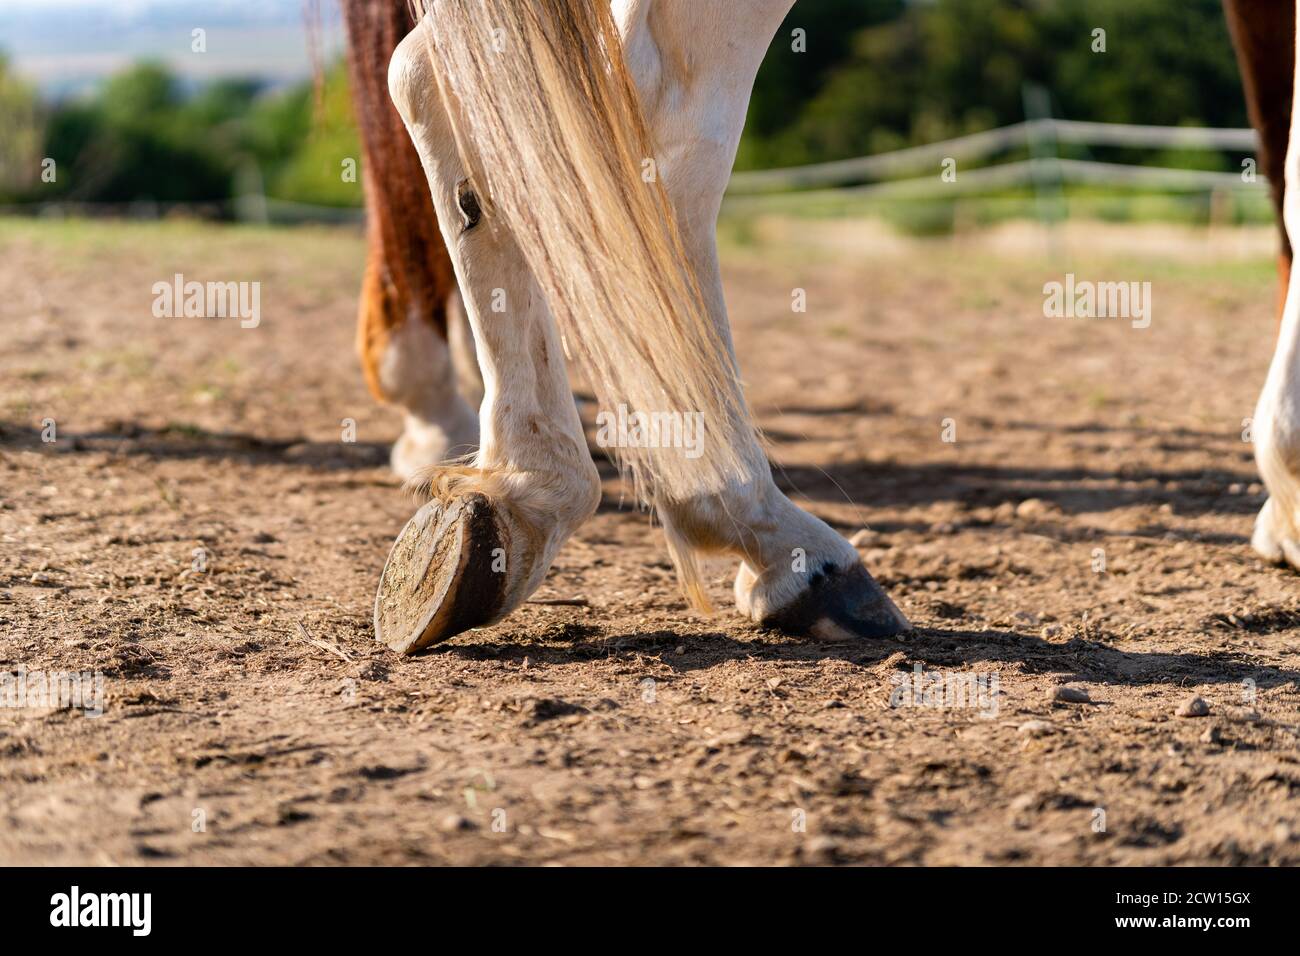 Close-up of a horse's hind legs and hooves in resting position on a horse pasture (paddock) at sunset. No horseshoes. Concepts of rest, relaxation and Stock Photo